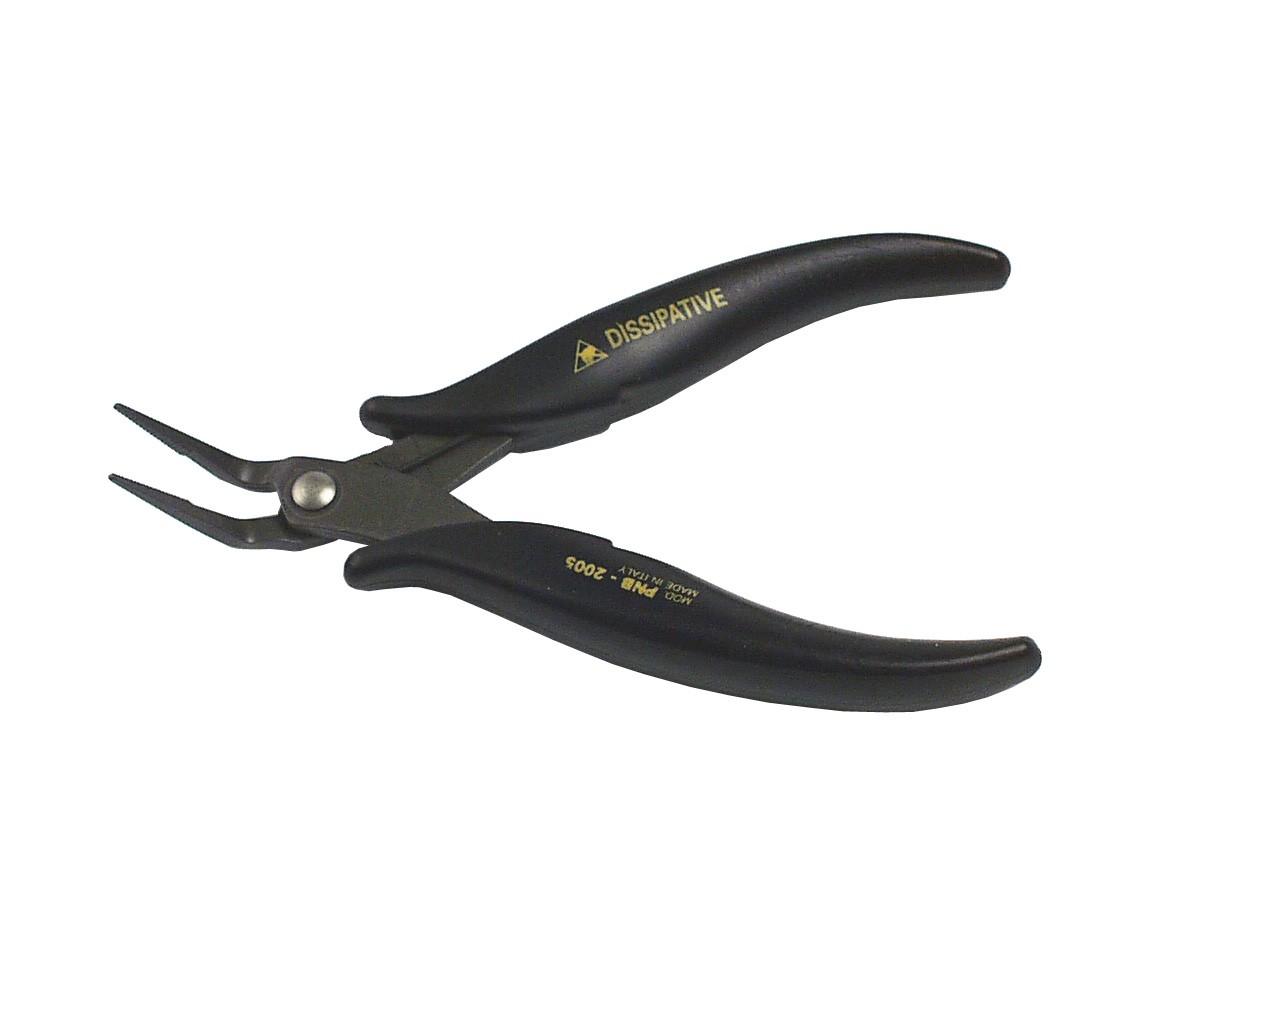  Bended plier 45 ° dissipative